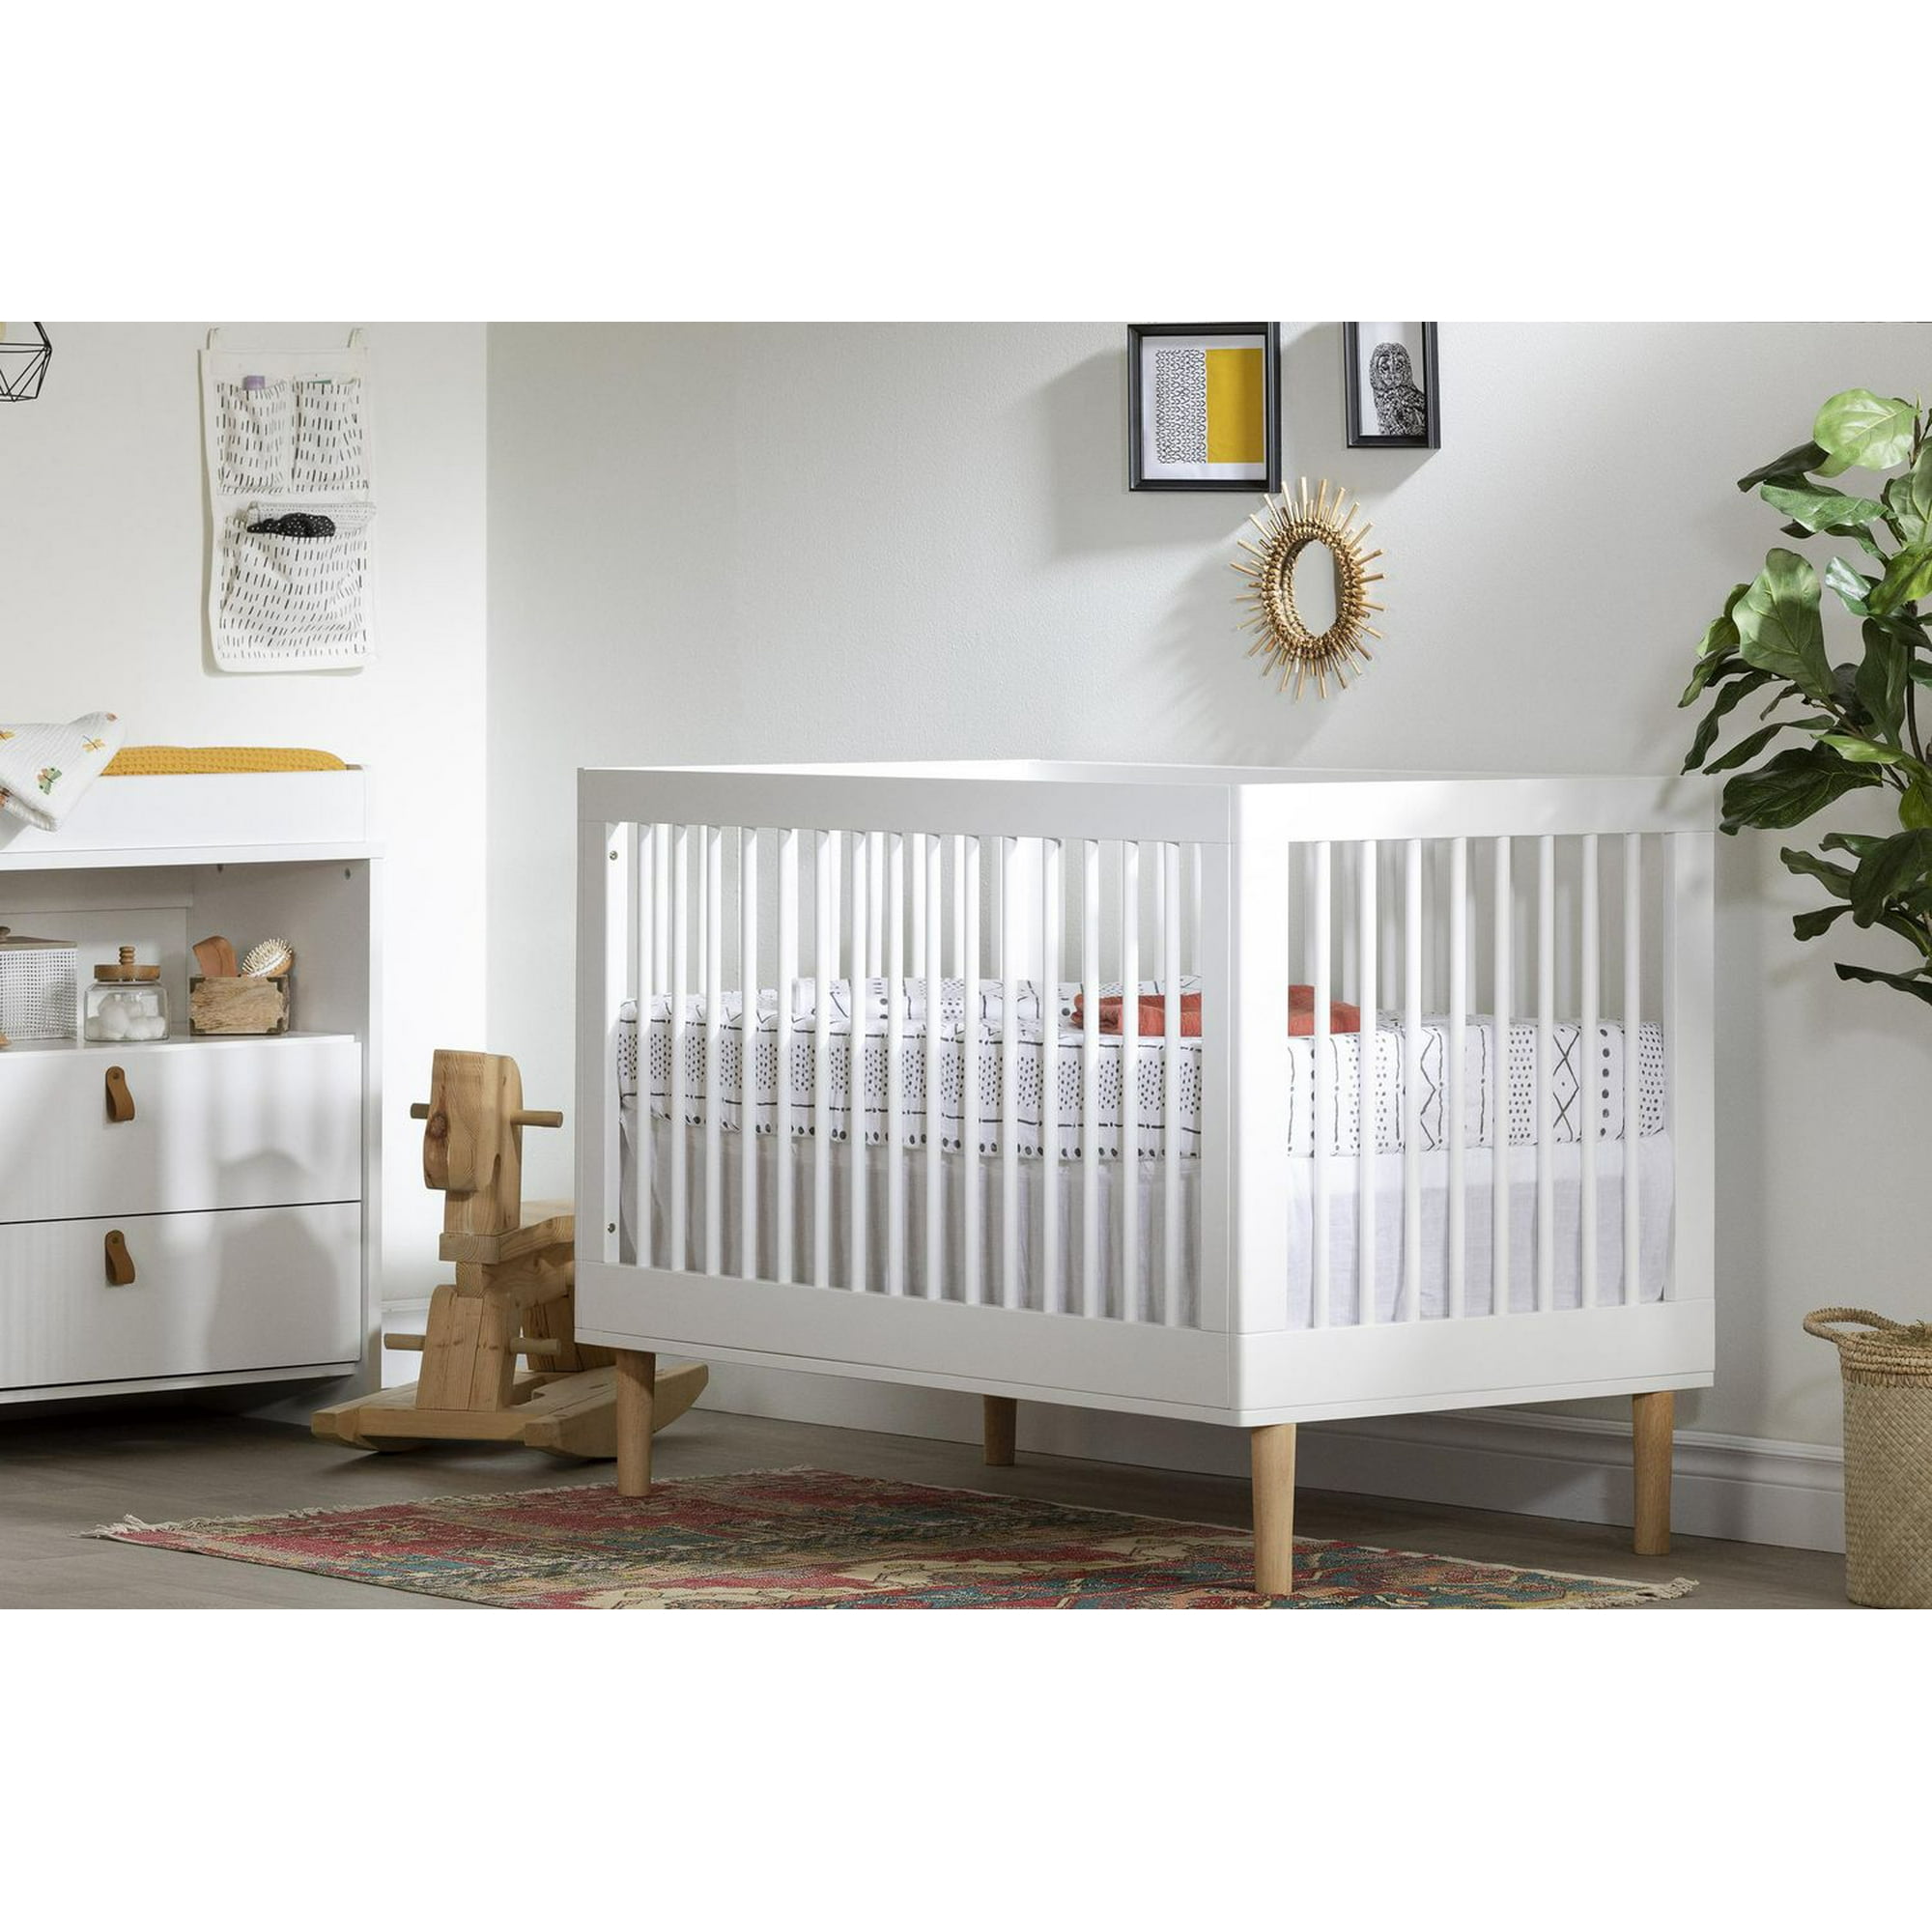 South Shore Balka Baby Crib with Adjustable Height White and